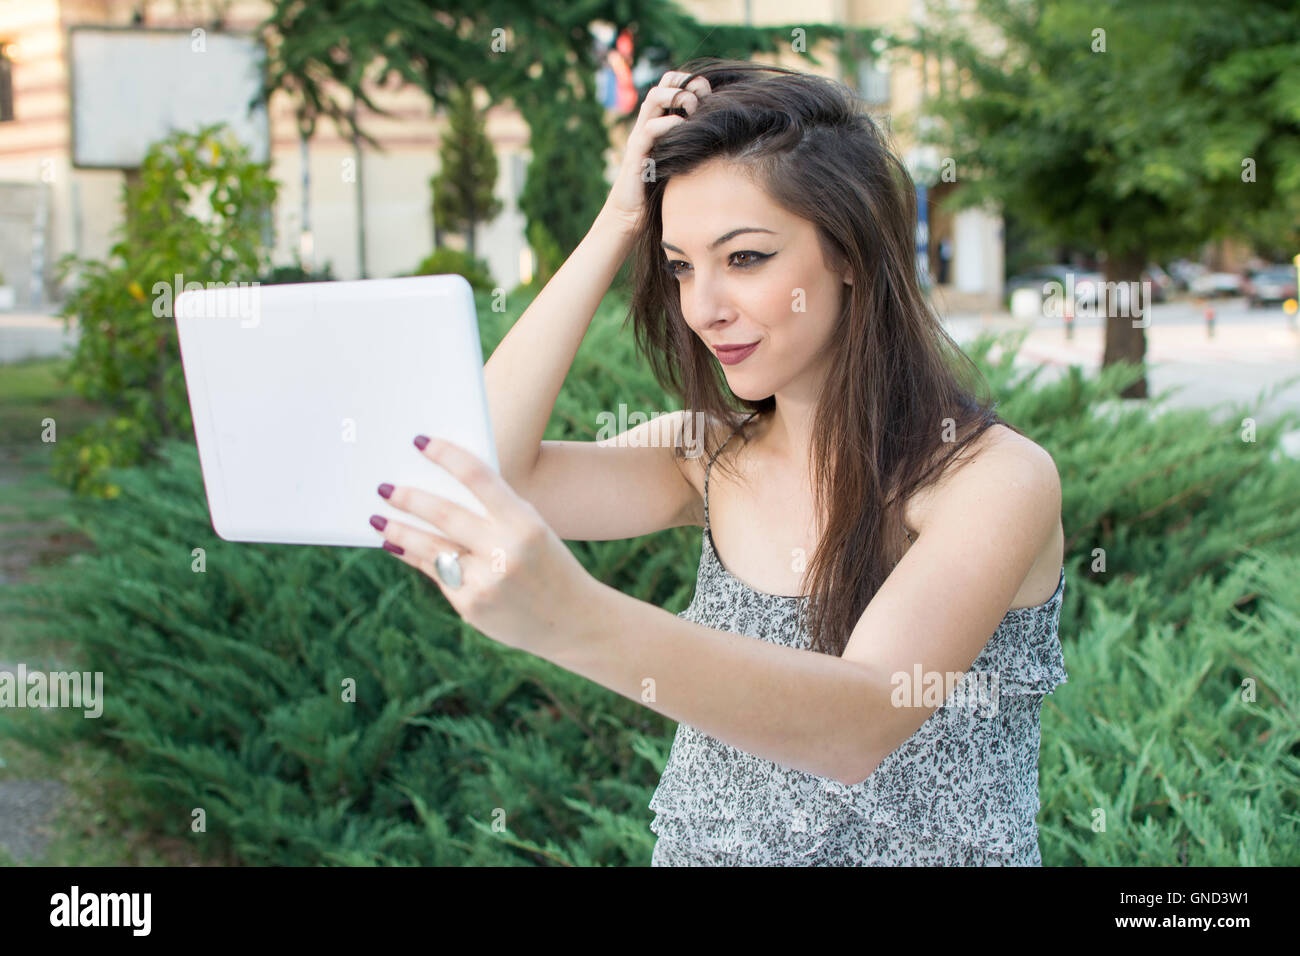 Young woman taking selfie with a tablet device Stock Photo